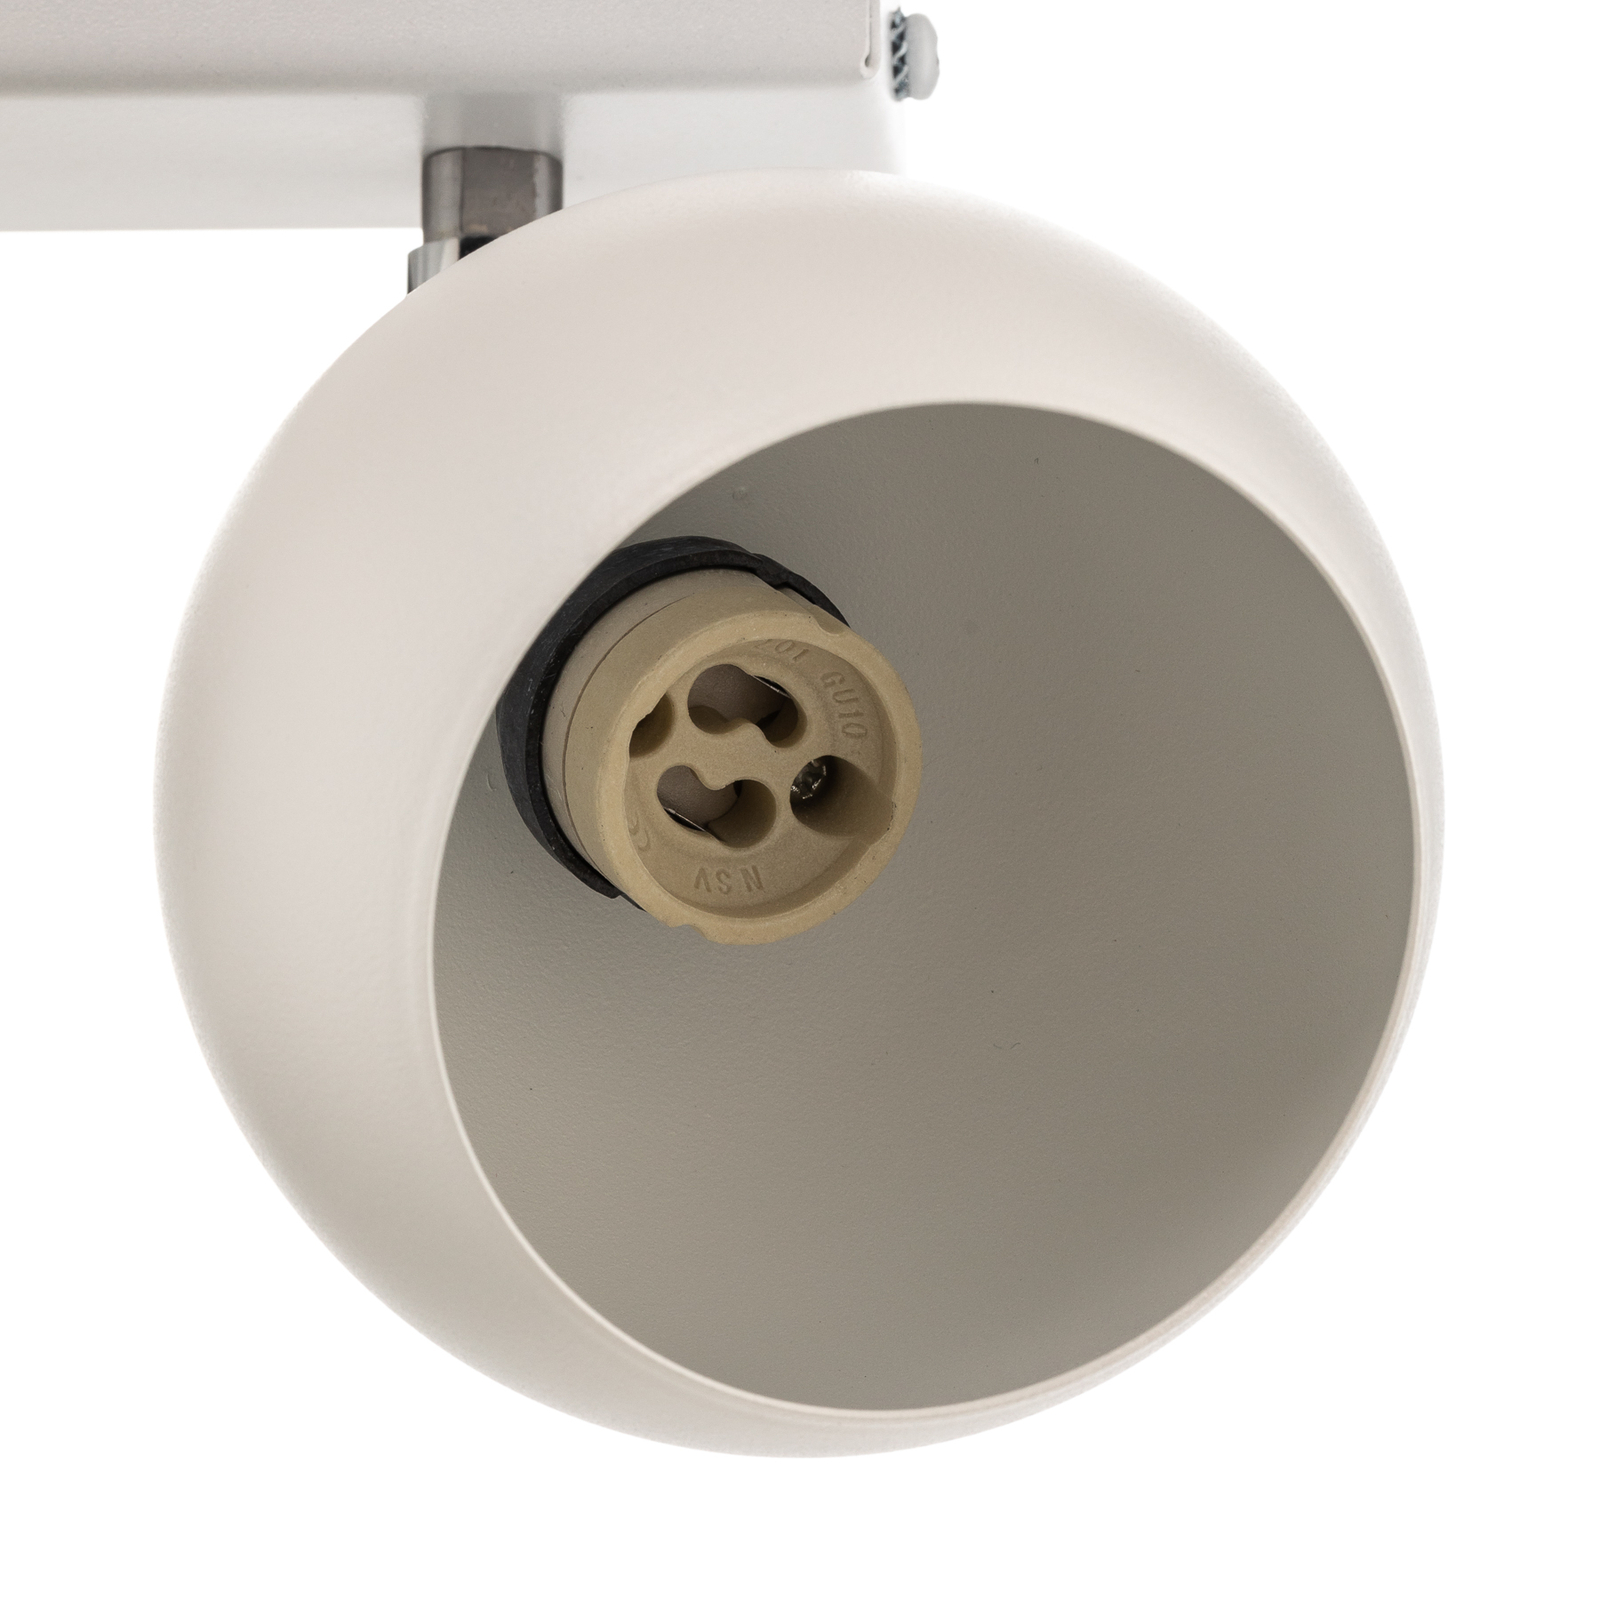 Flame downlight in white, three-bulb